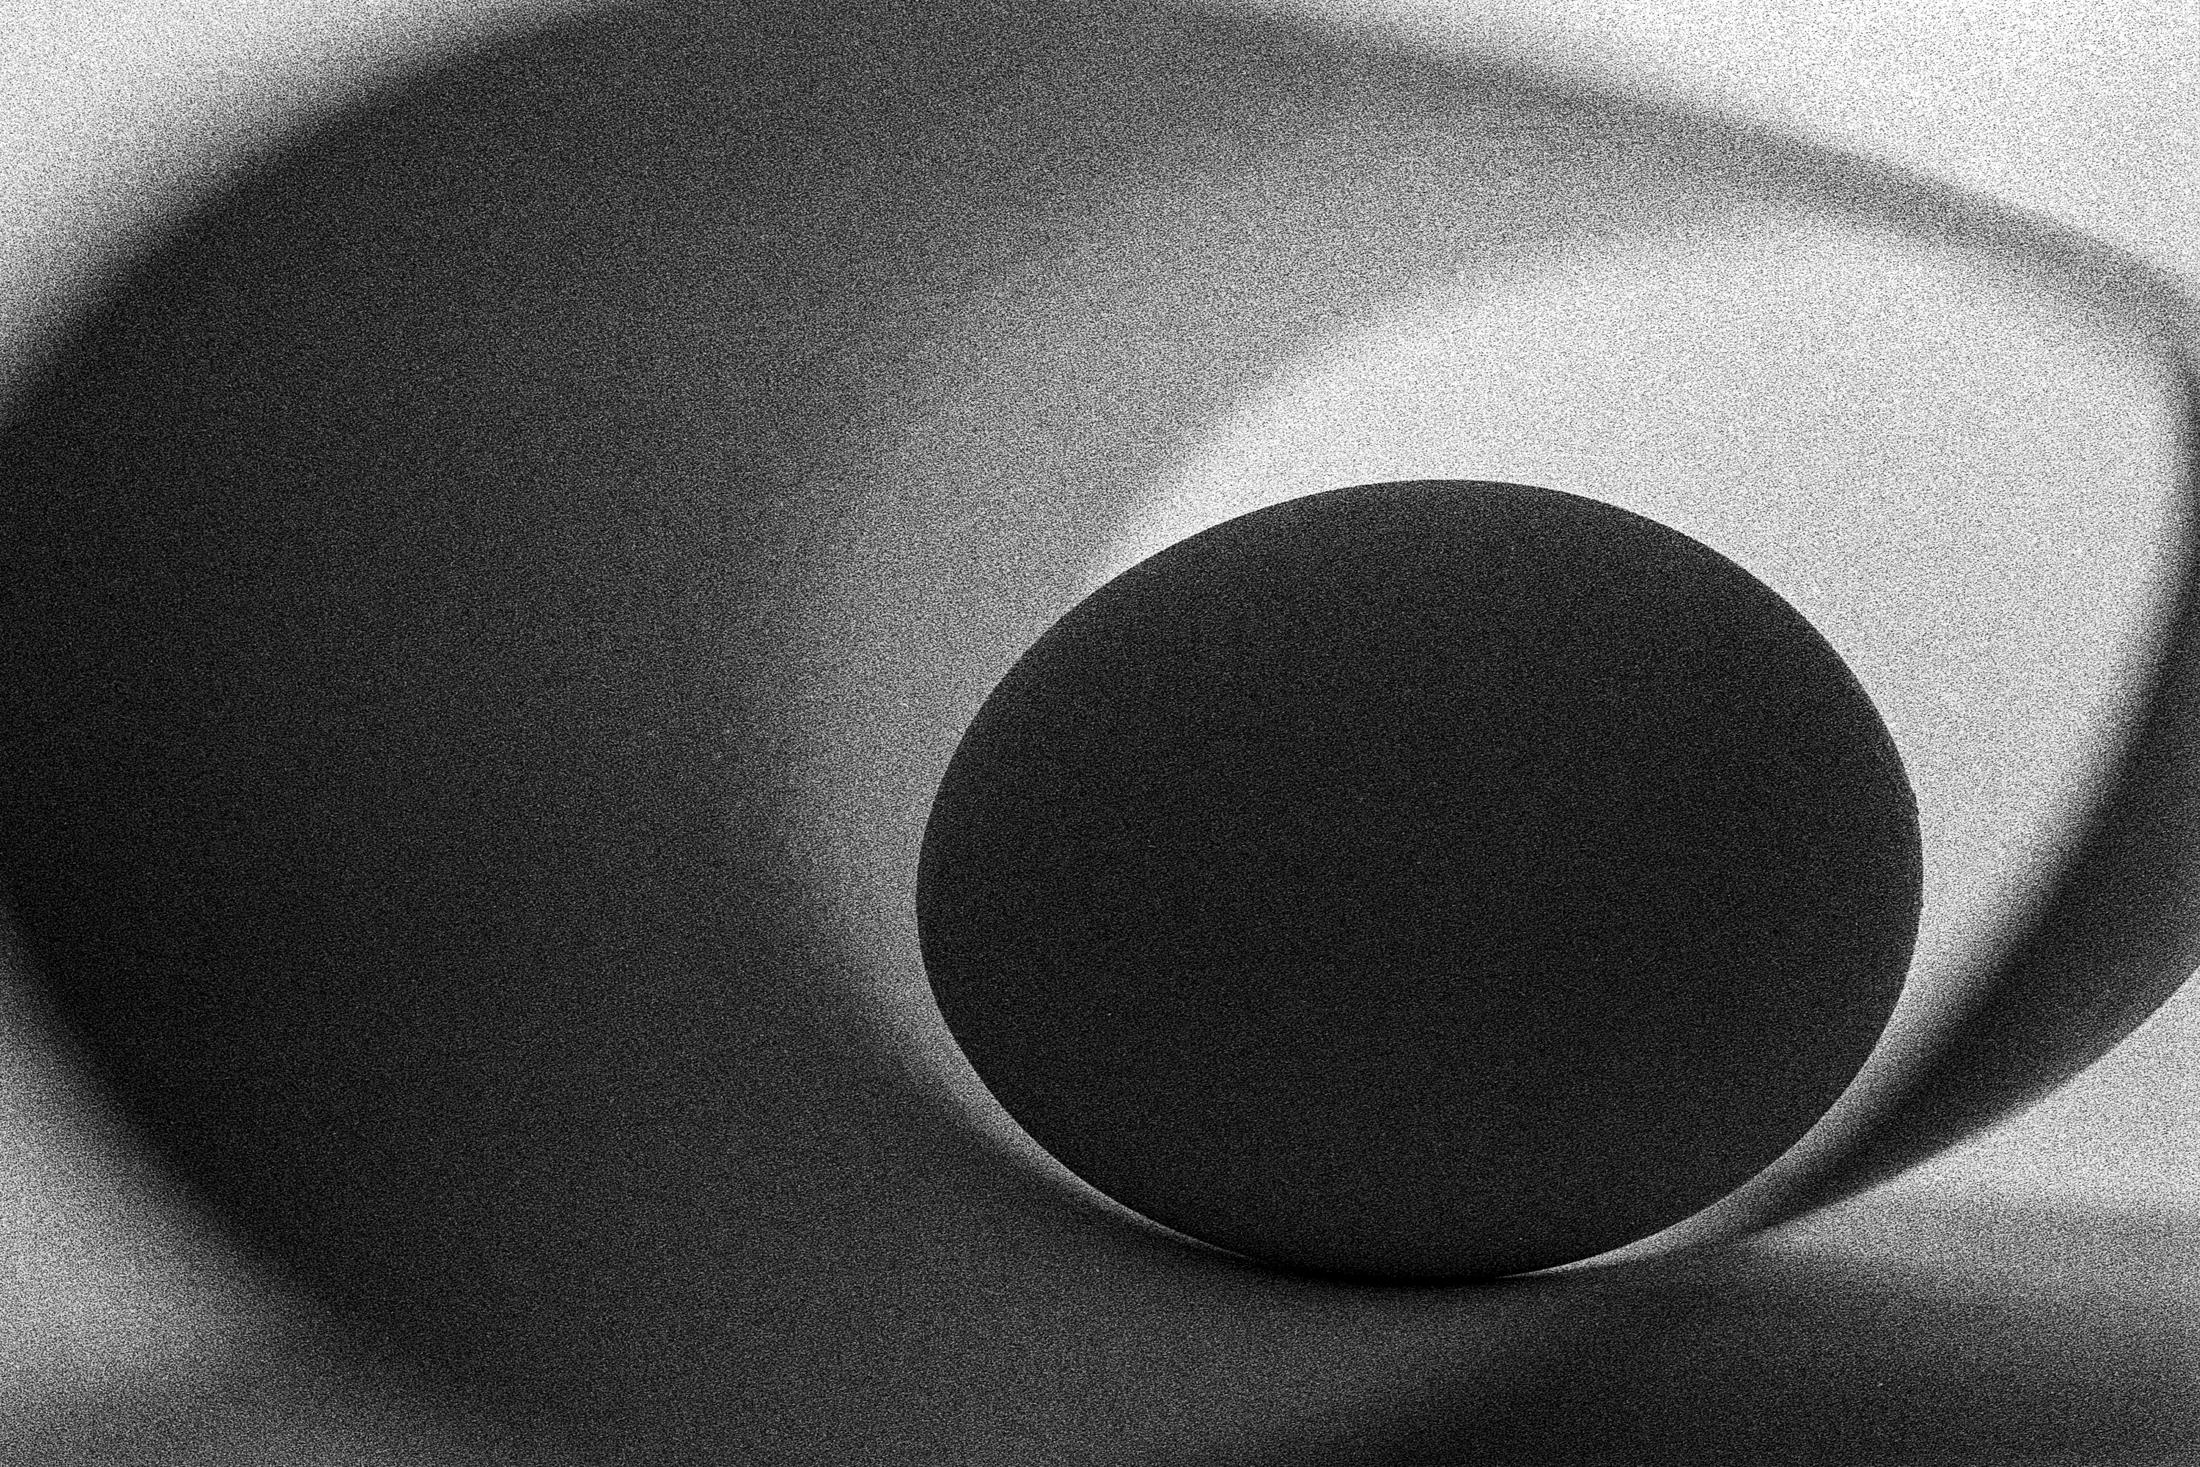 Shine Huang Abstract Photograph - Egg Study 1. Still Life . Black and White Silver Gelatin Print